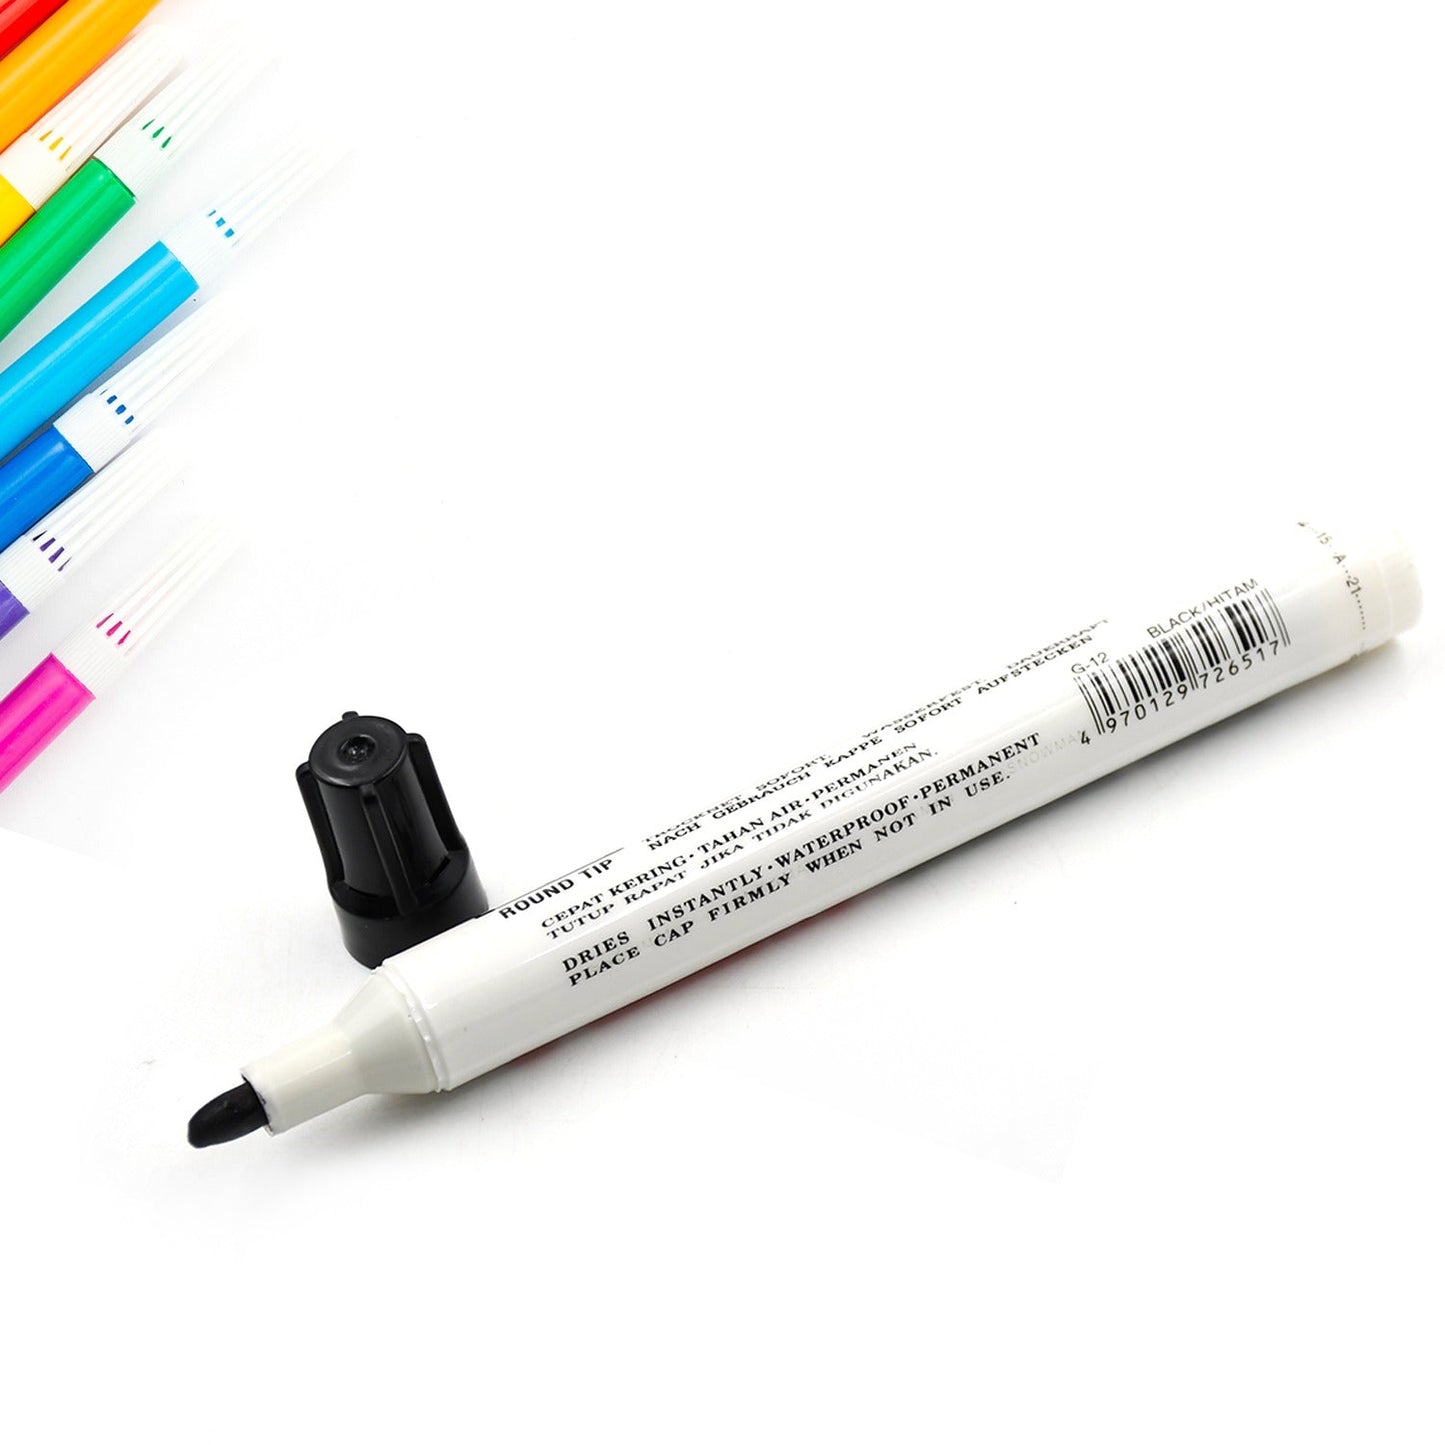 1625a BLACK PERMANENT MARKER LEAK PROOF MARKER CRAFTWORKS, SCHOOL PROJECTS AND OTHER | SUITABLE FOR OFFICE AND HOME USE (PACK OF 12 PC)